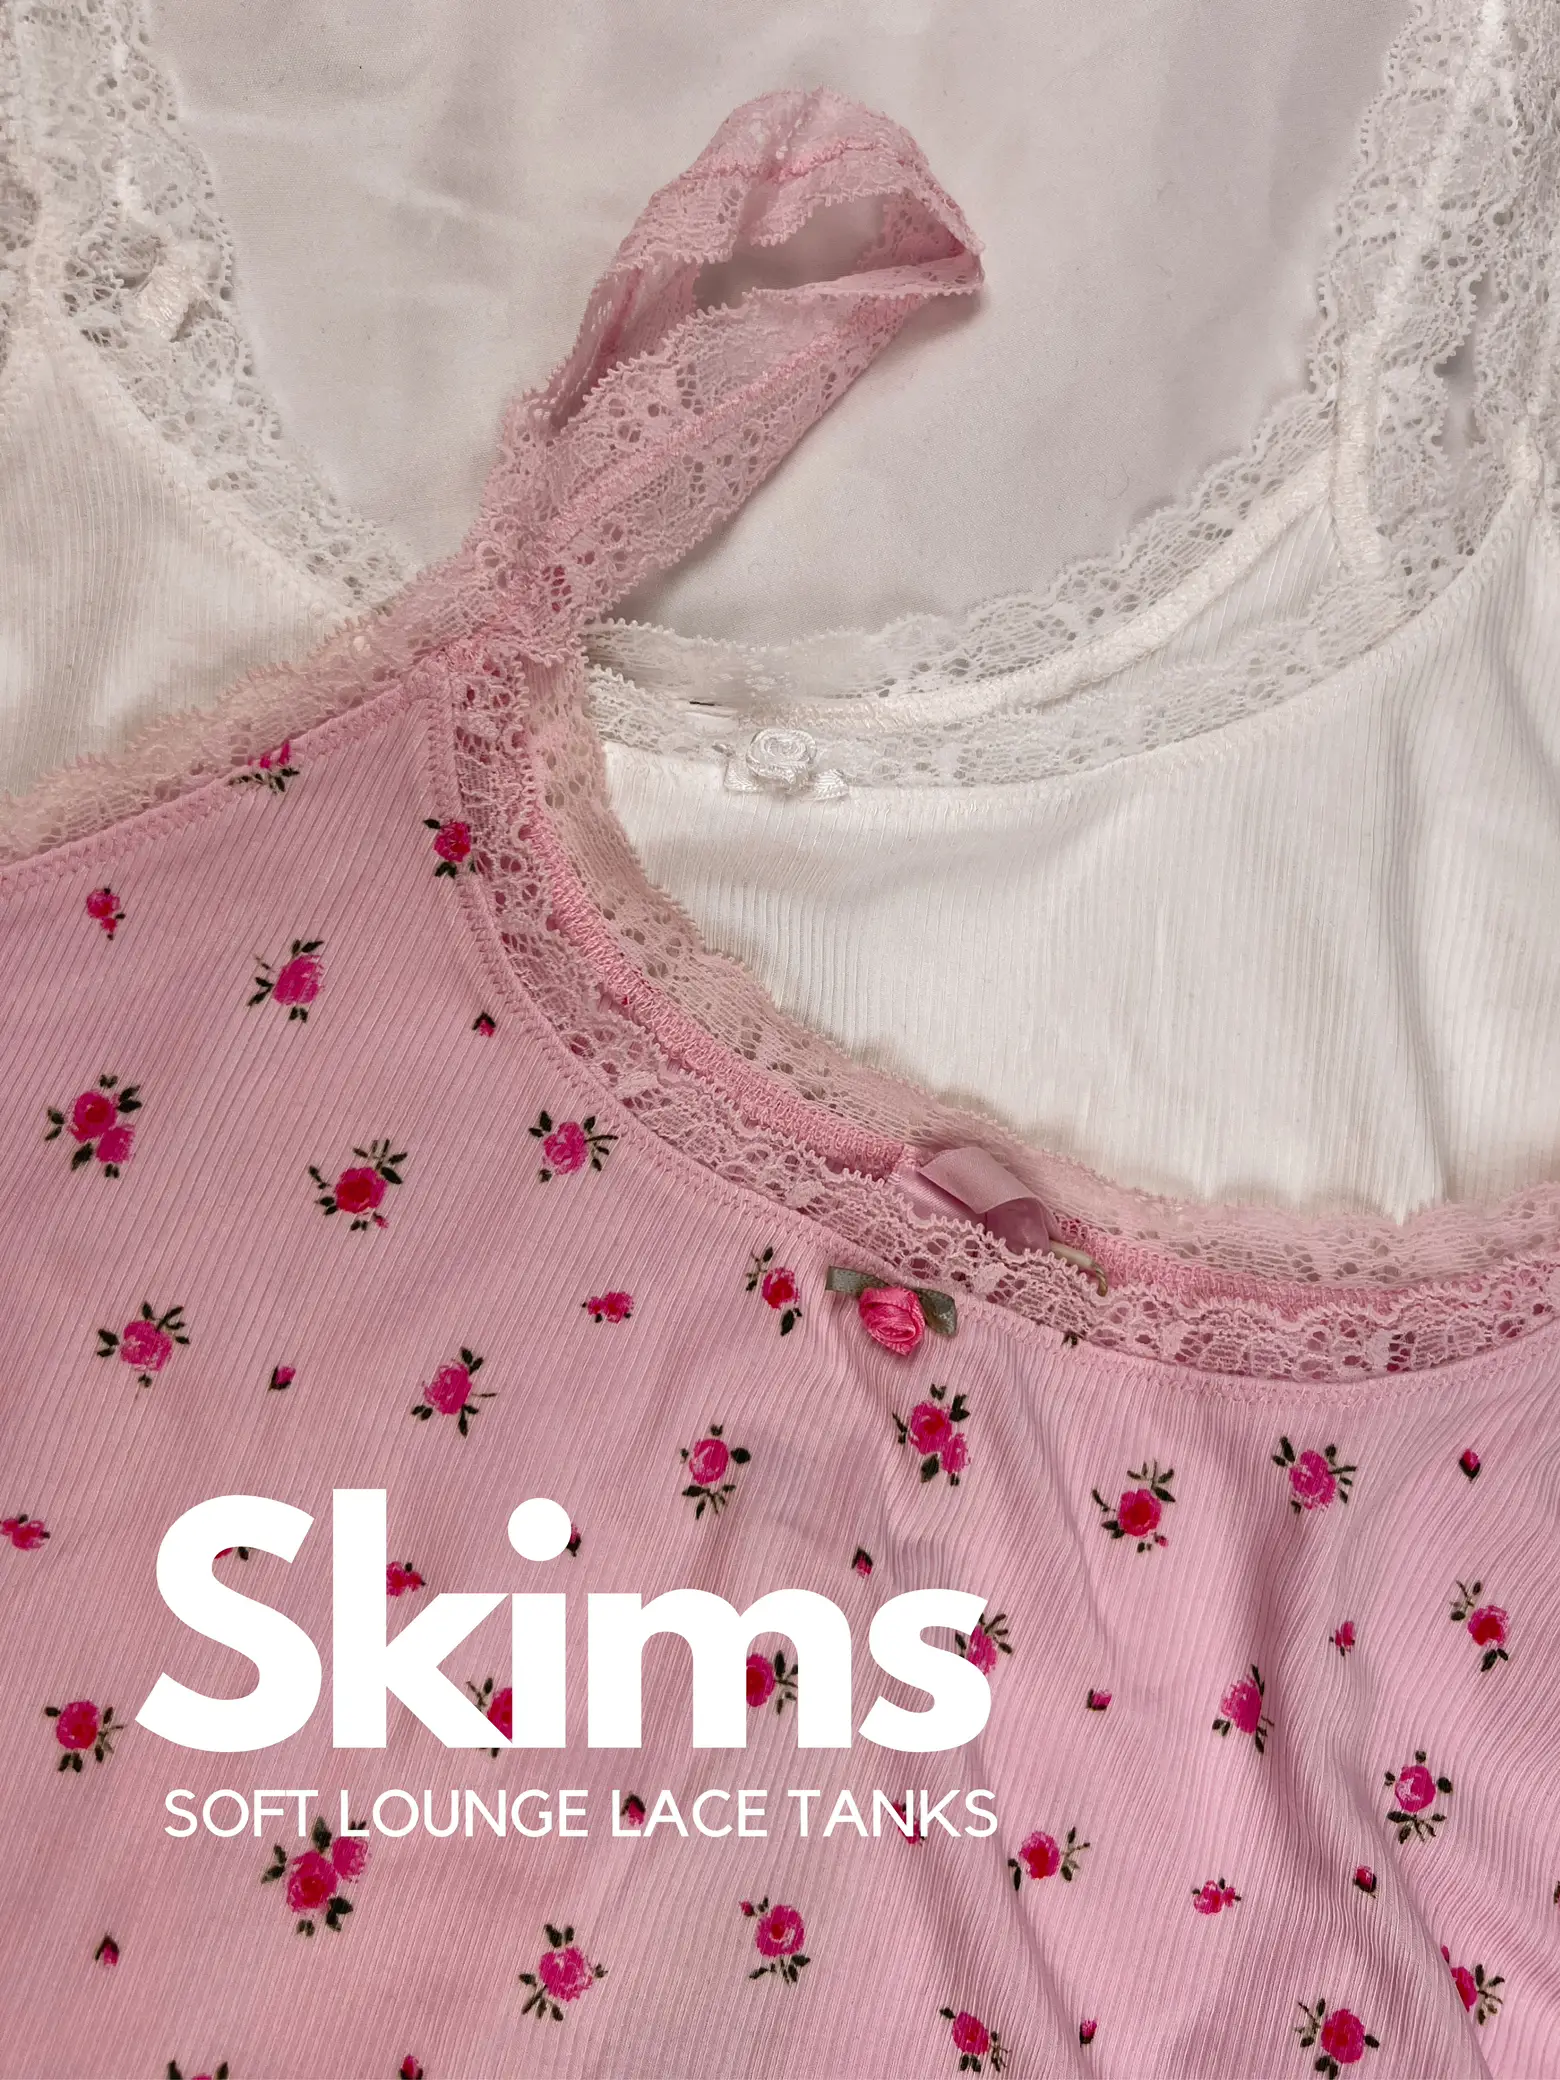 Skims Underwear Try On + Review, Gallery posted by taylercaffee